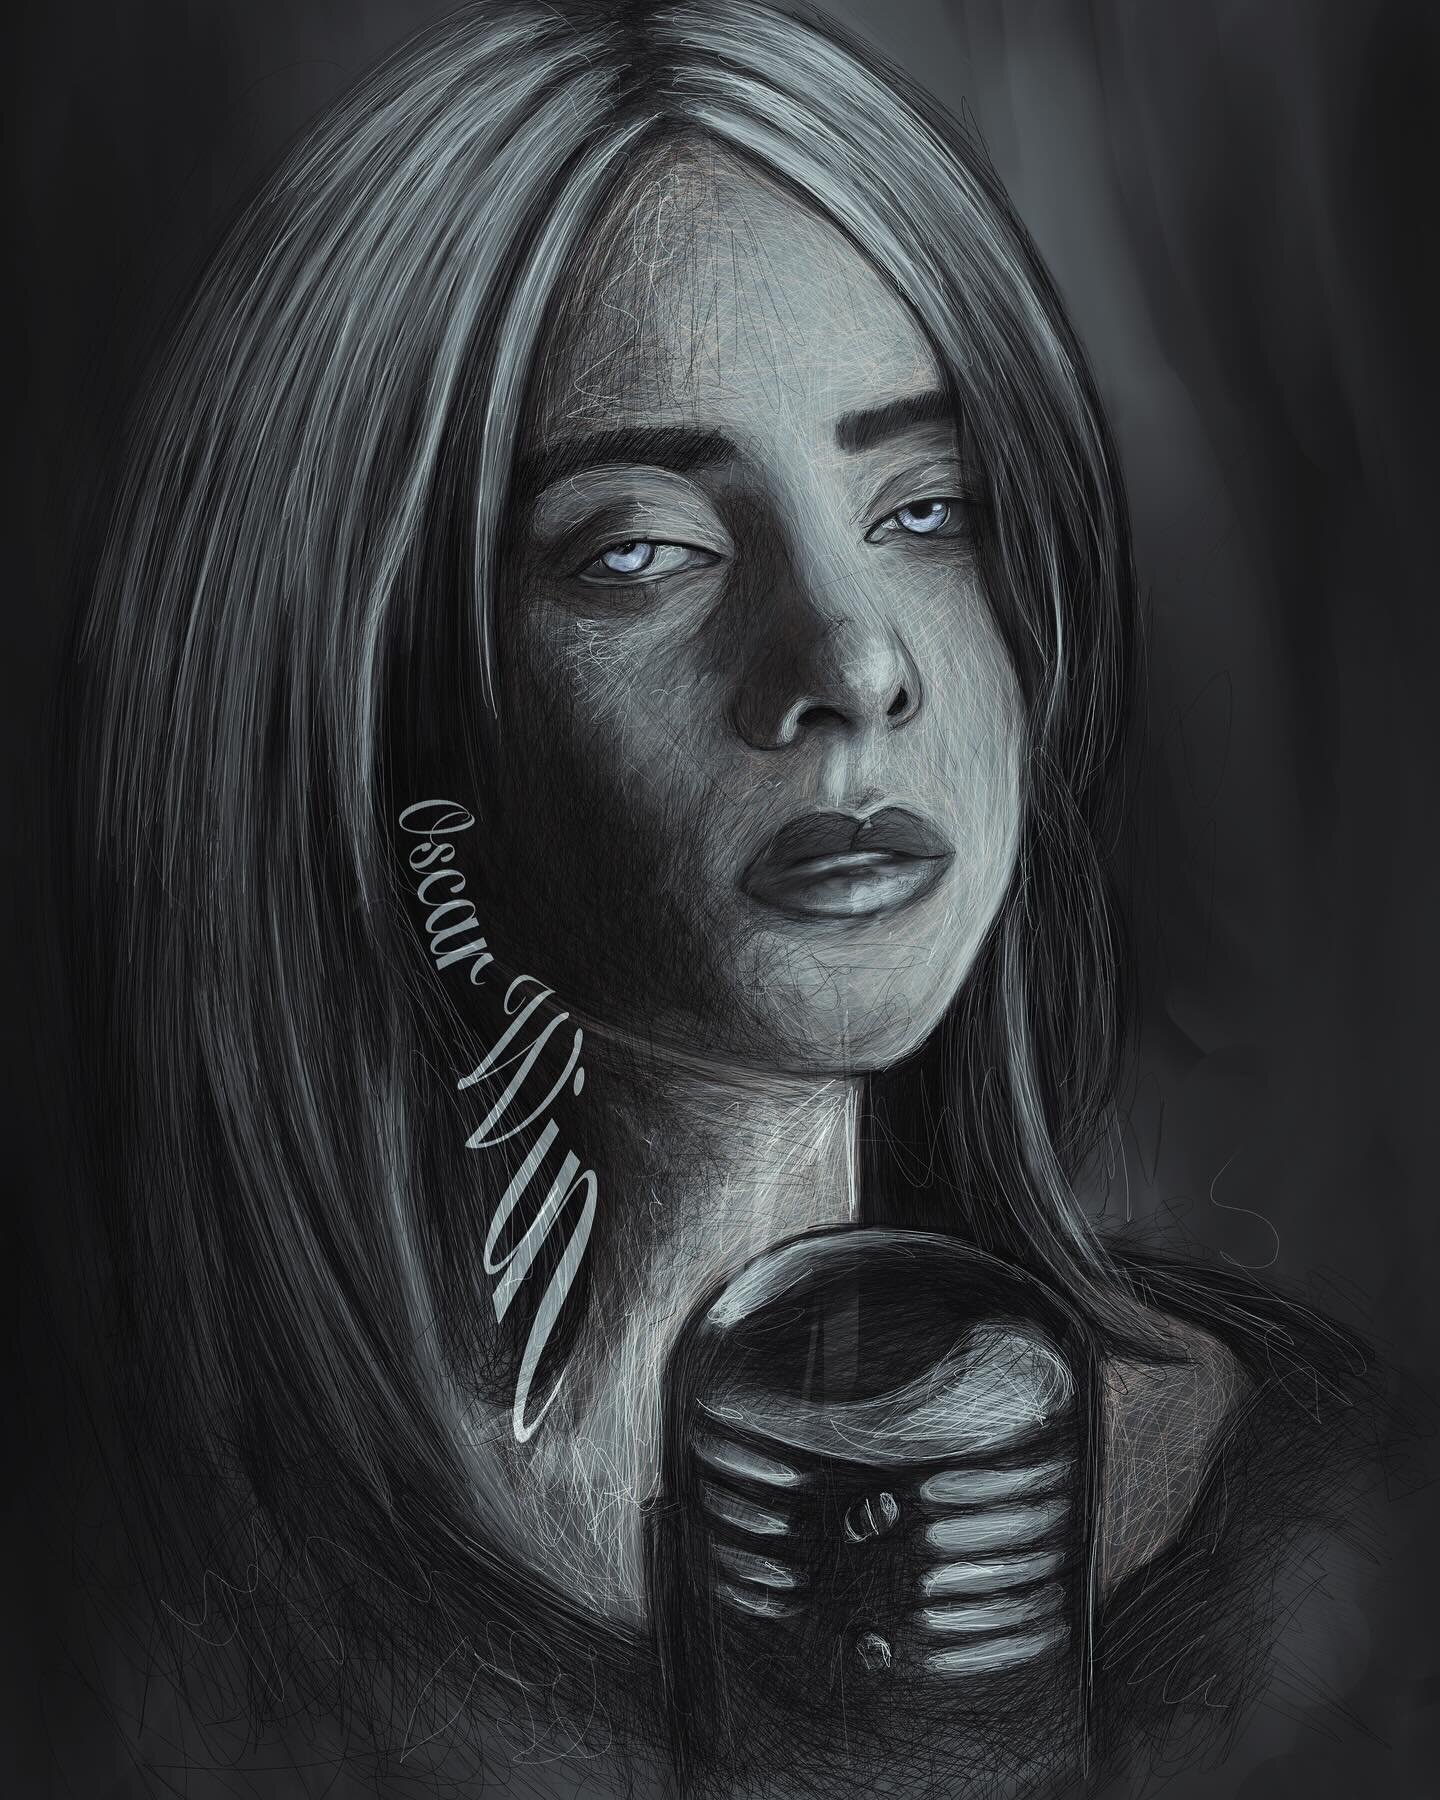 The Oscar Winner @billieeilish 

This was a speed drawing based on a great reference.. I wanted to see how quickly I could render tonal differences.. how loose I could make the pen strokes before I started losing form.. 

She is an incredibly interes